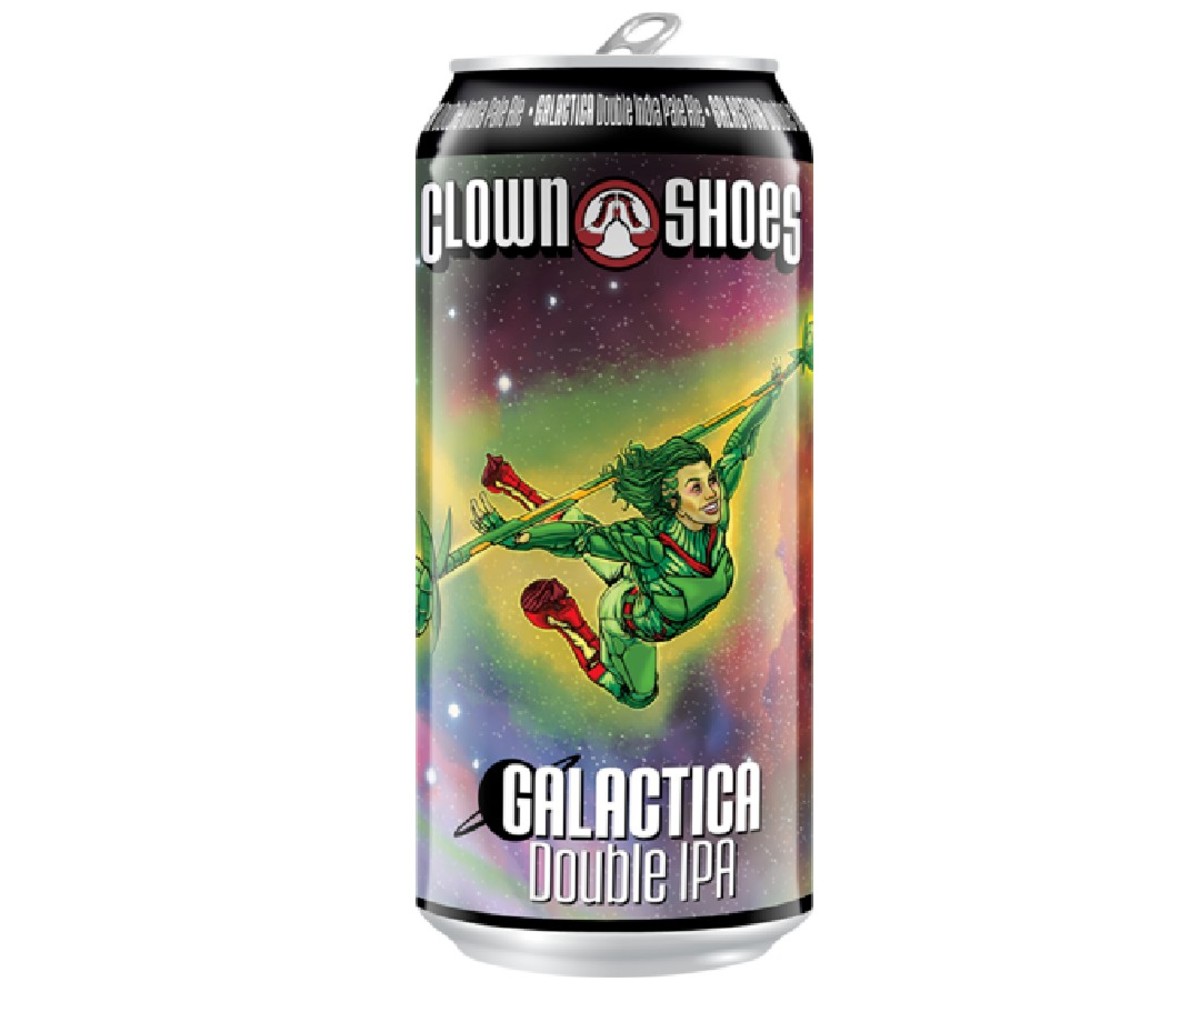 Can of Clown Shoes Galactica double IPA beer